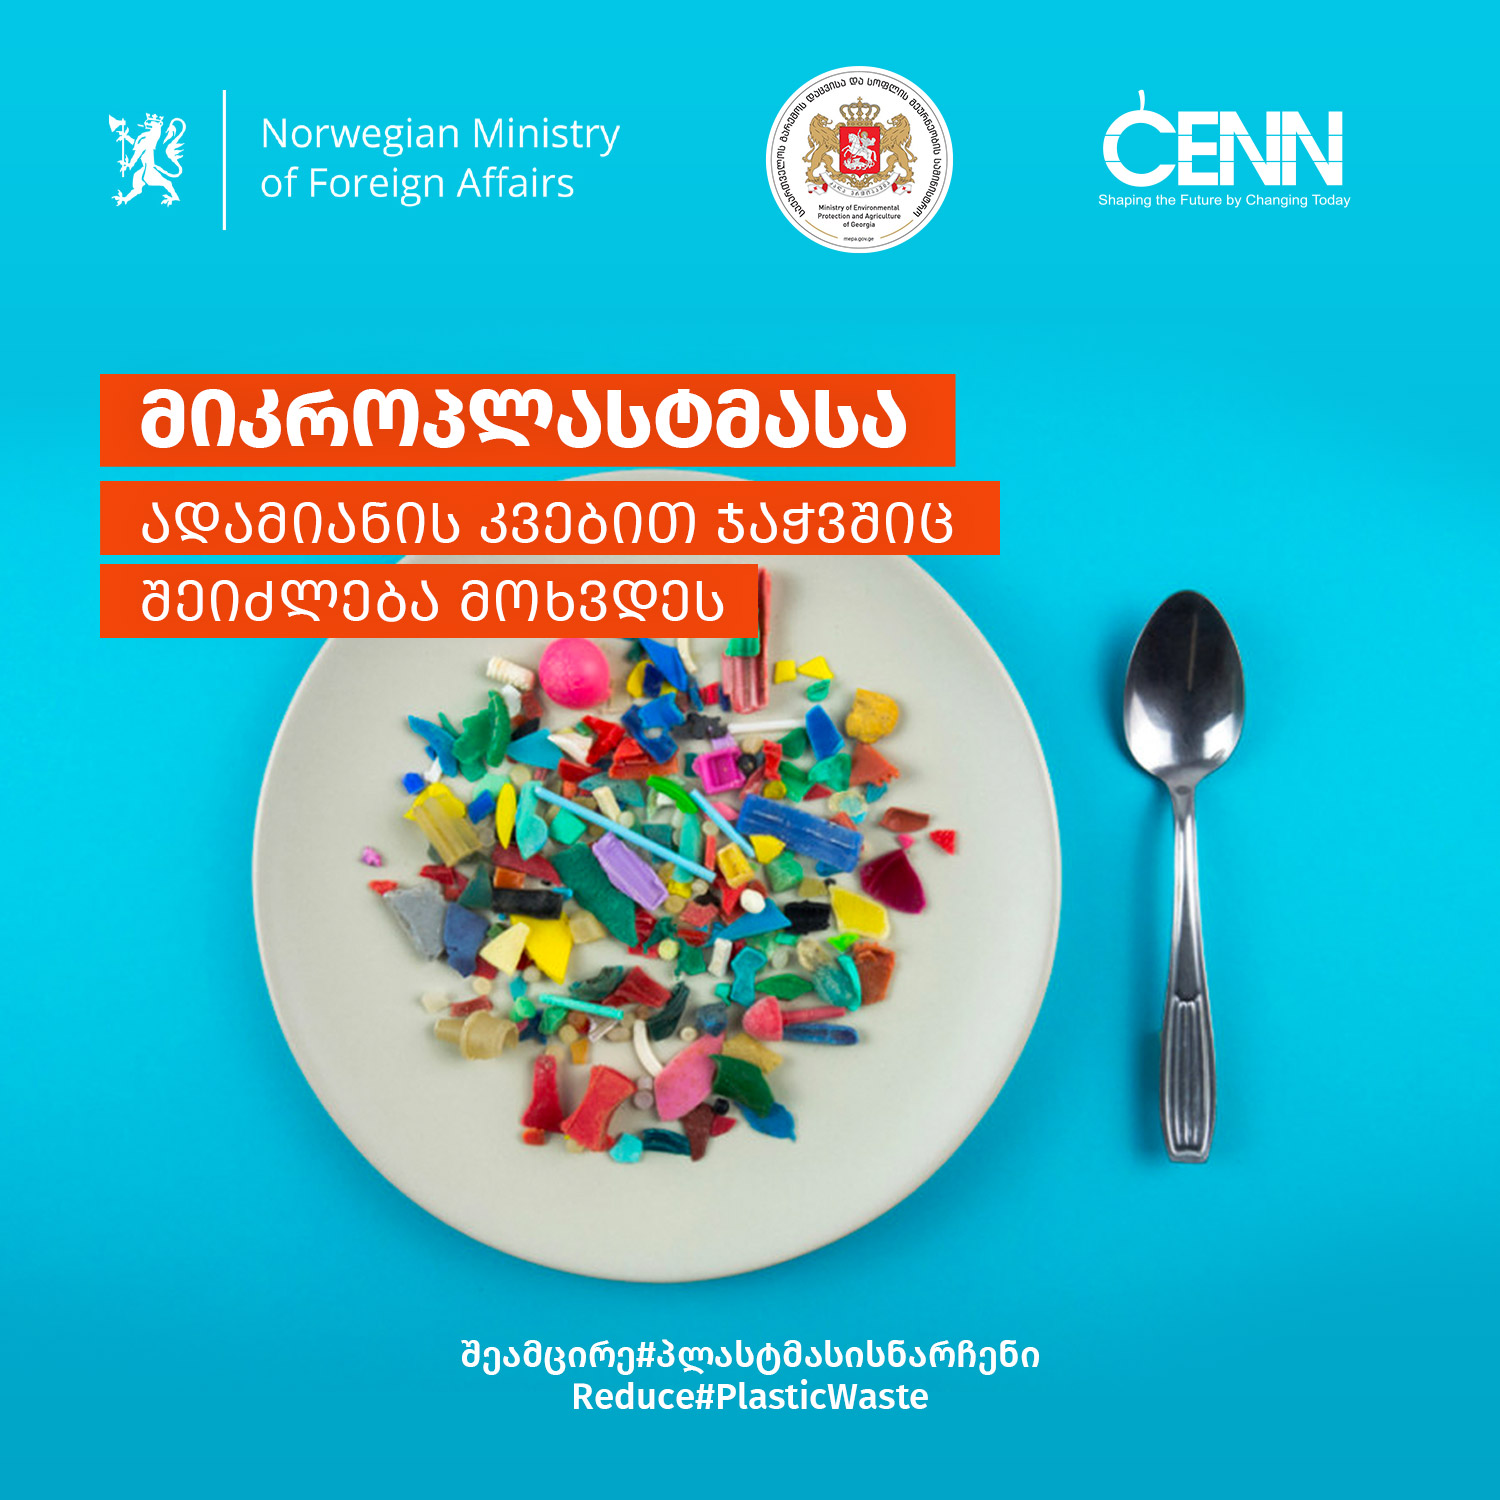 CENN, with Support of the Norwegian Embassy, together with the Ministry of Environmental Protection and Agriculture, is Developing a National Plastic Waste Prevention Program